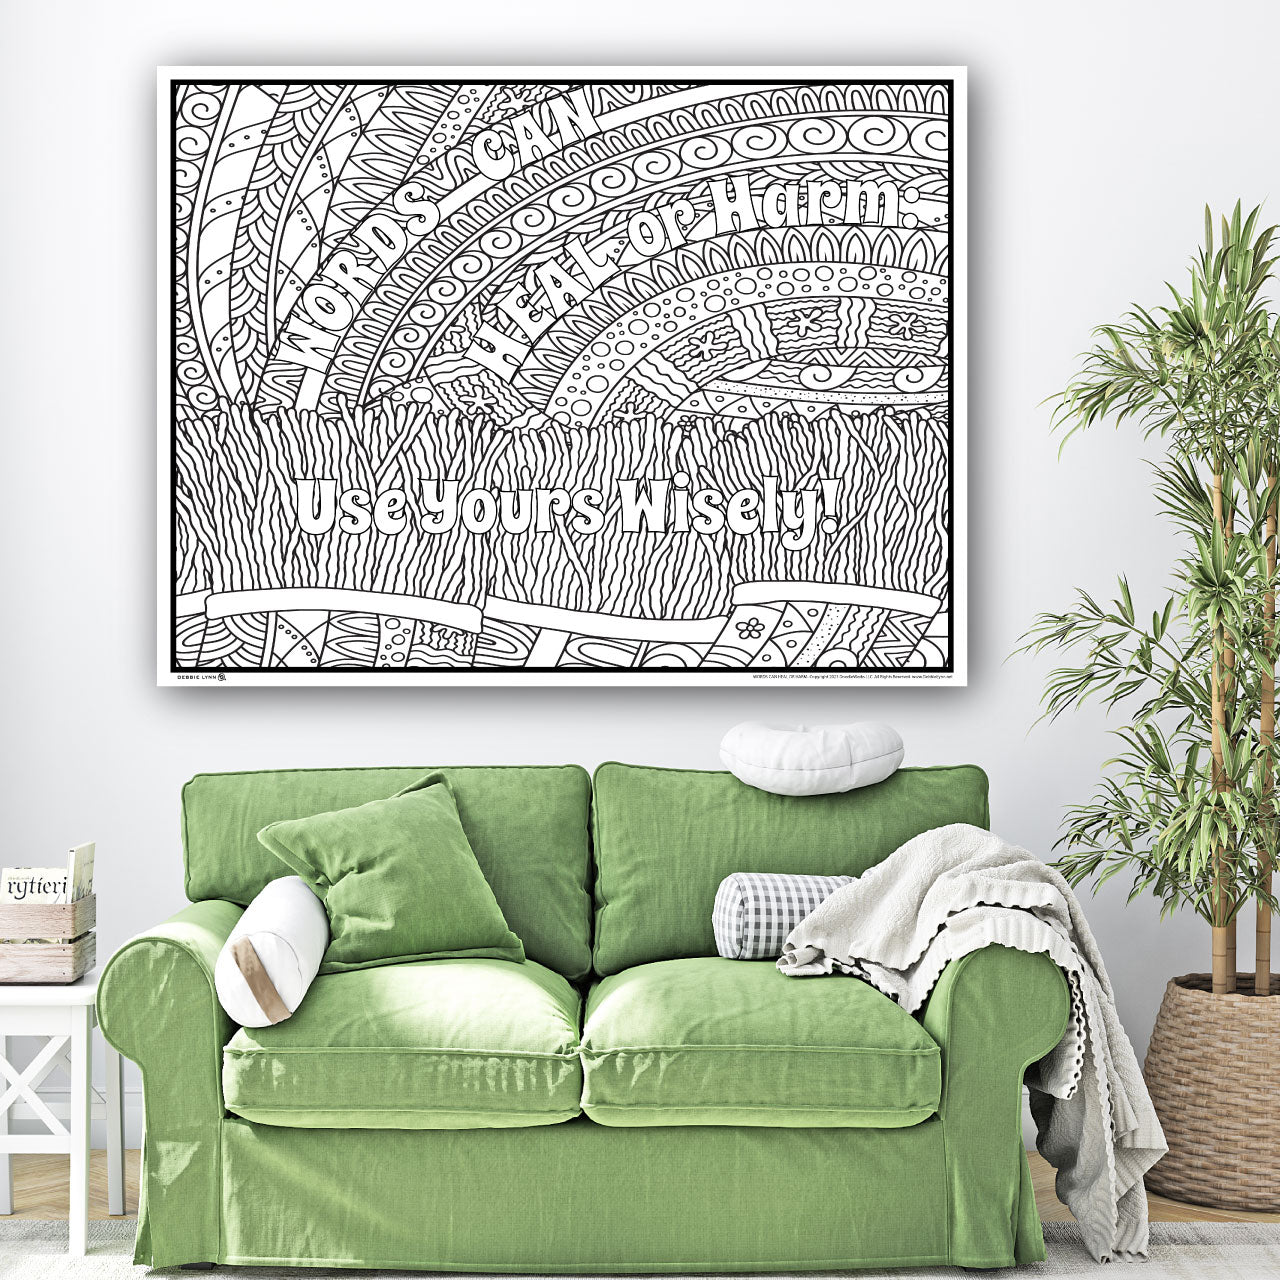 Words Can Heal or Harm Personalized Giant Coloring Poster 46"x60"